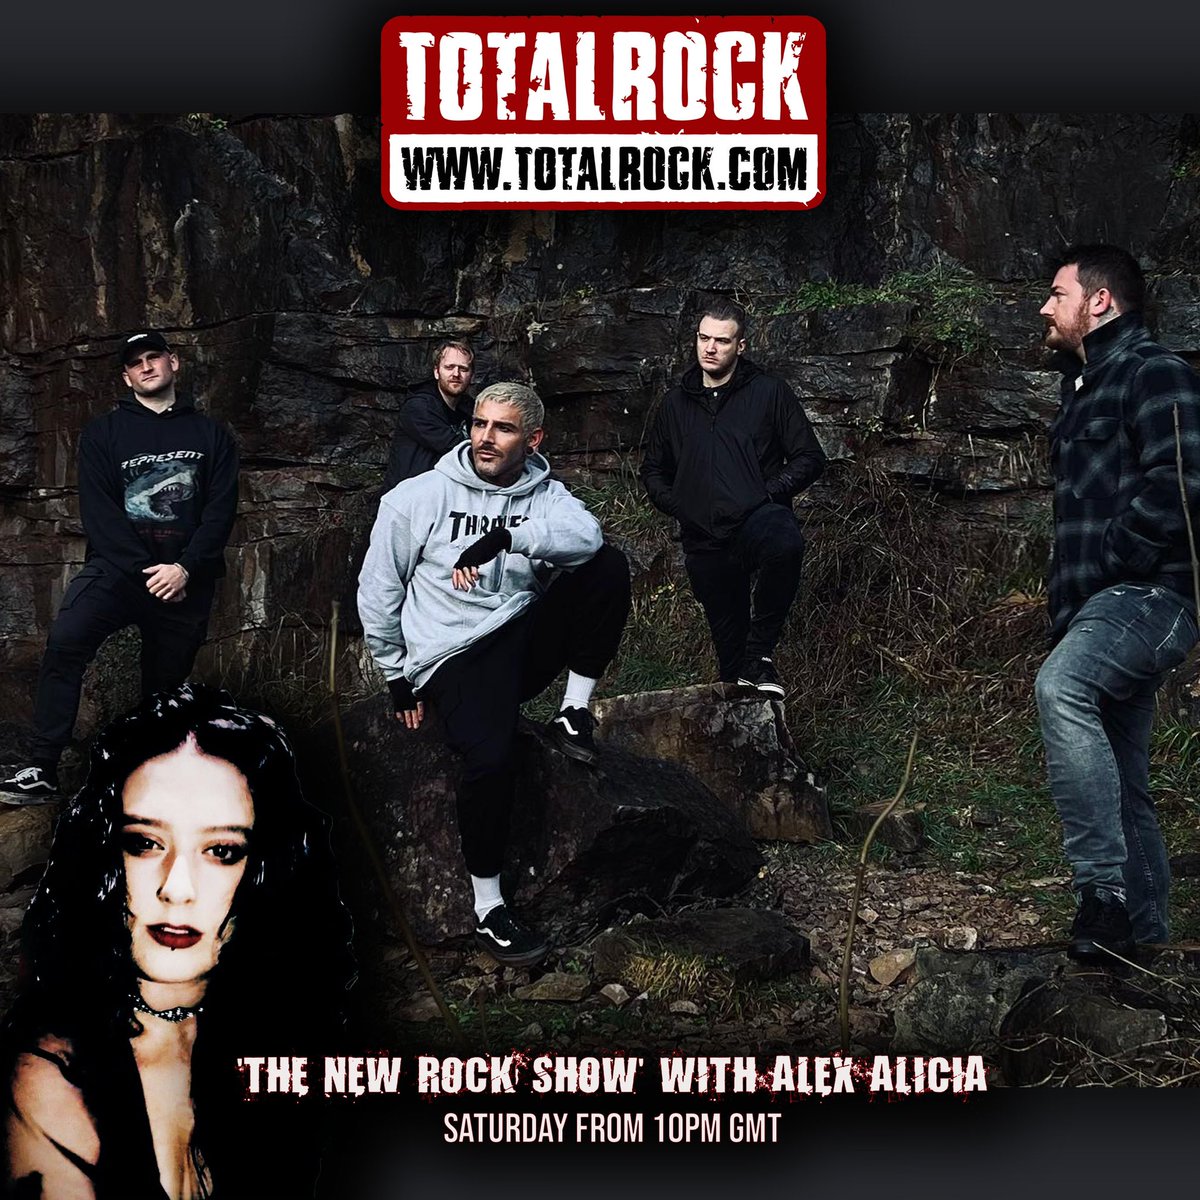 Our new single “Breakaway” is being played tonight on @TotalRockOnline from 10pm hosted by @alexaliciamedia! Make sure to tune in, it’s always a great show 🤘🏻 #NewMusic #rockmusic